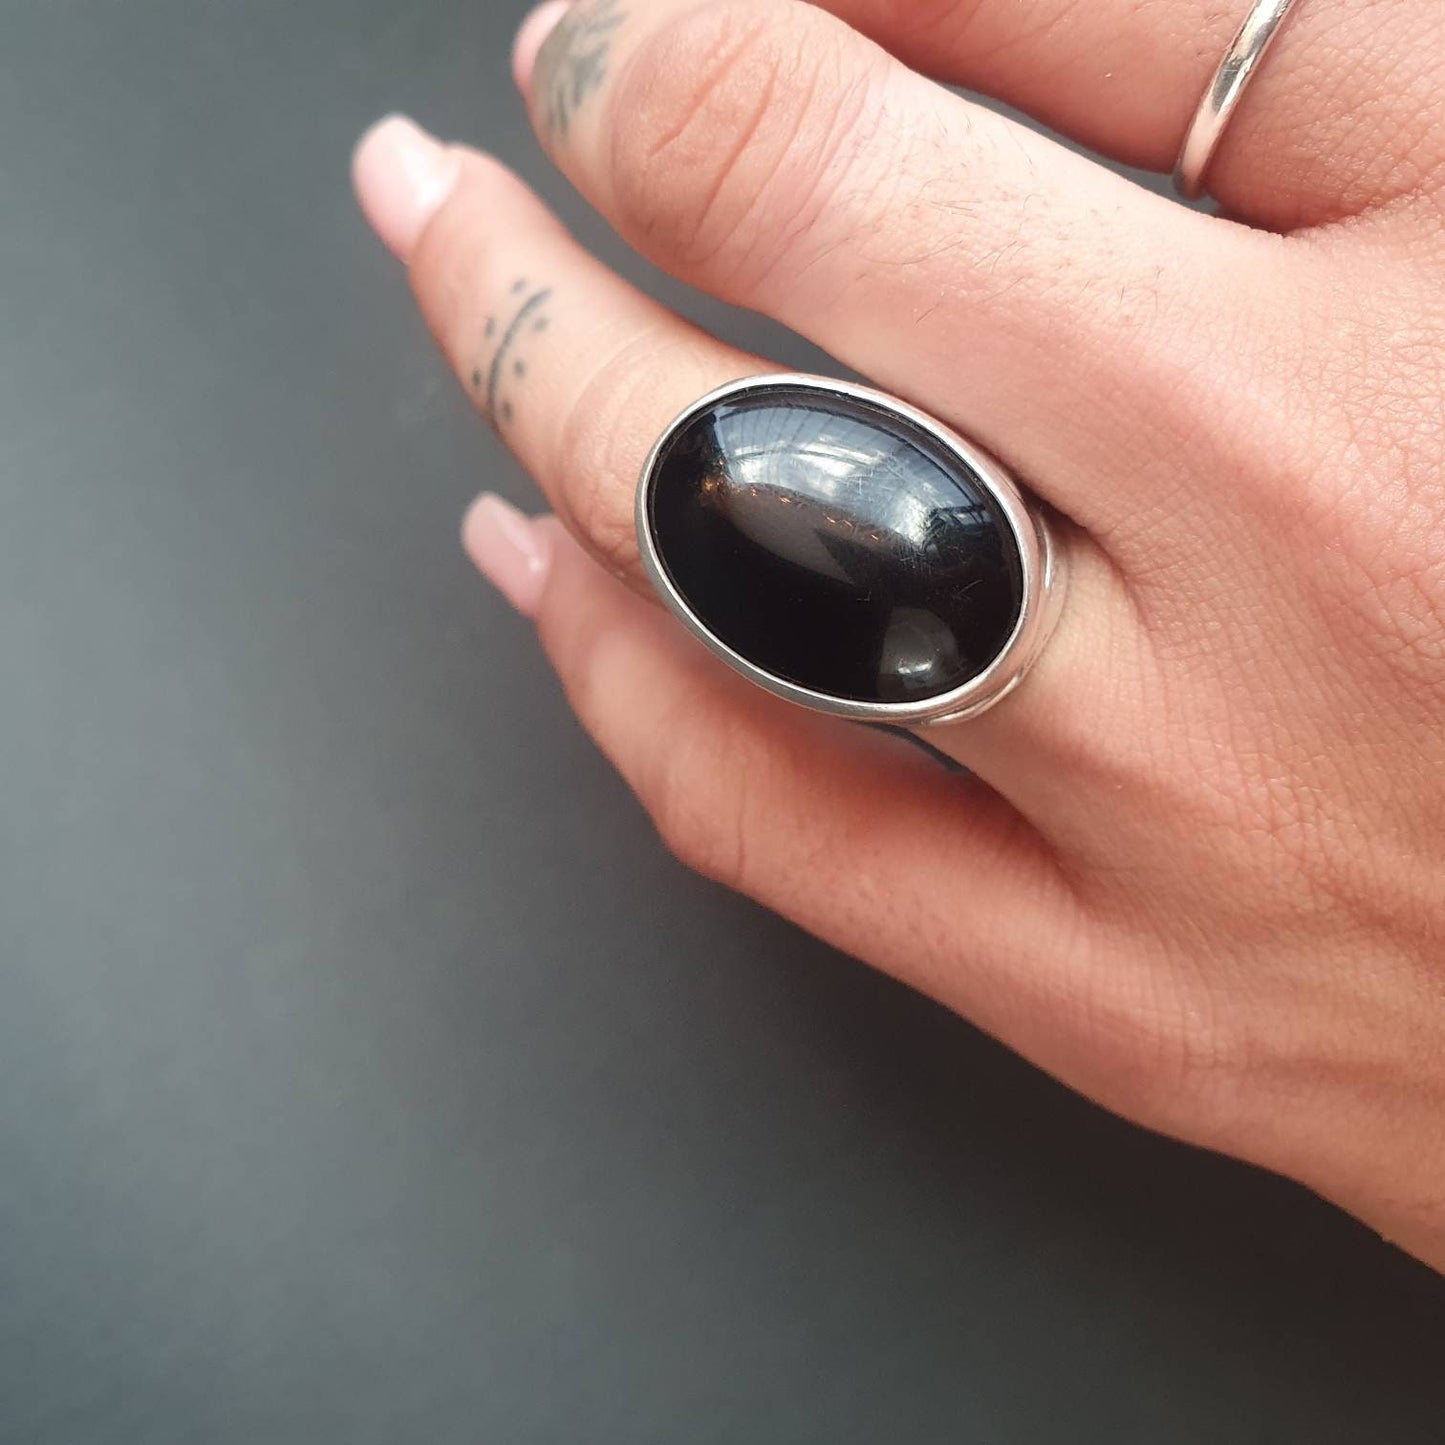 Chunky statement ring, black onyx ring 925, sterling silver Statement ring 925, large black onyx ring, Gothic ring, witchy ring, tribe ring